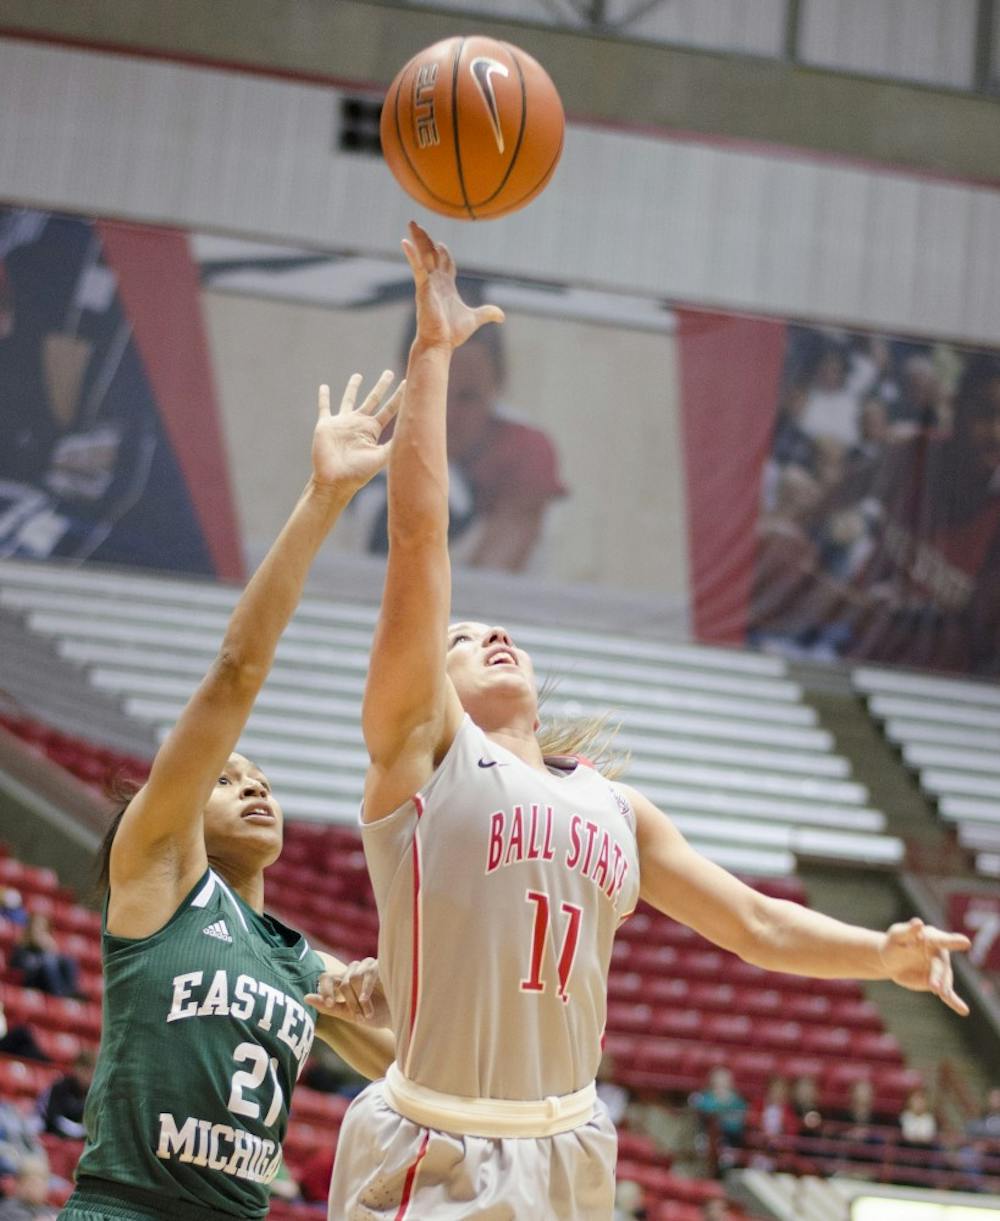 Senior guard Brandy Woody goes for a shot against Eastern Michigan on Feb. 23 at Worthen Arena. DN PHOTO BREANNA DAUGHERTY